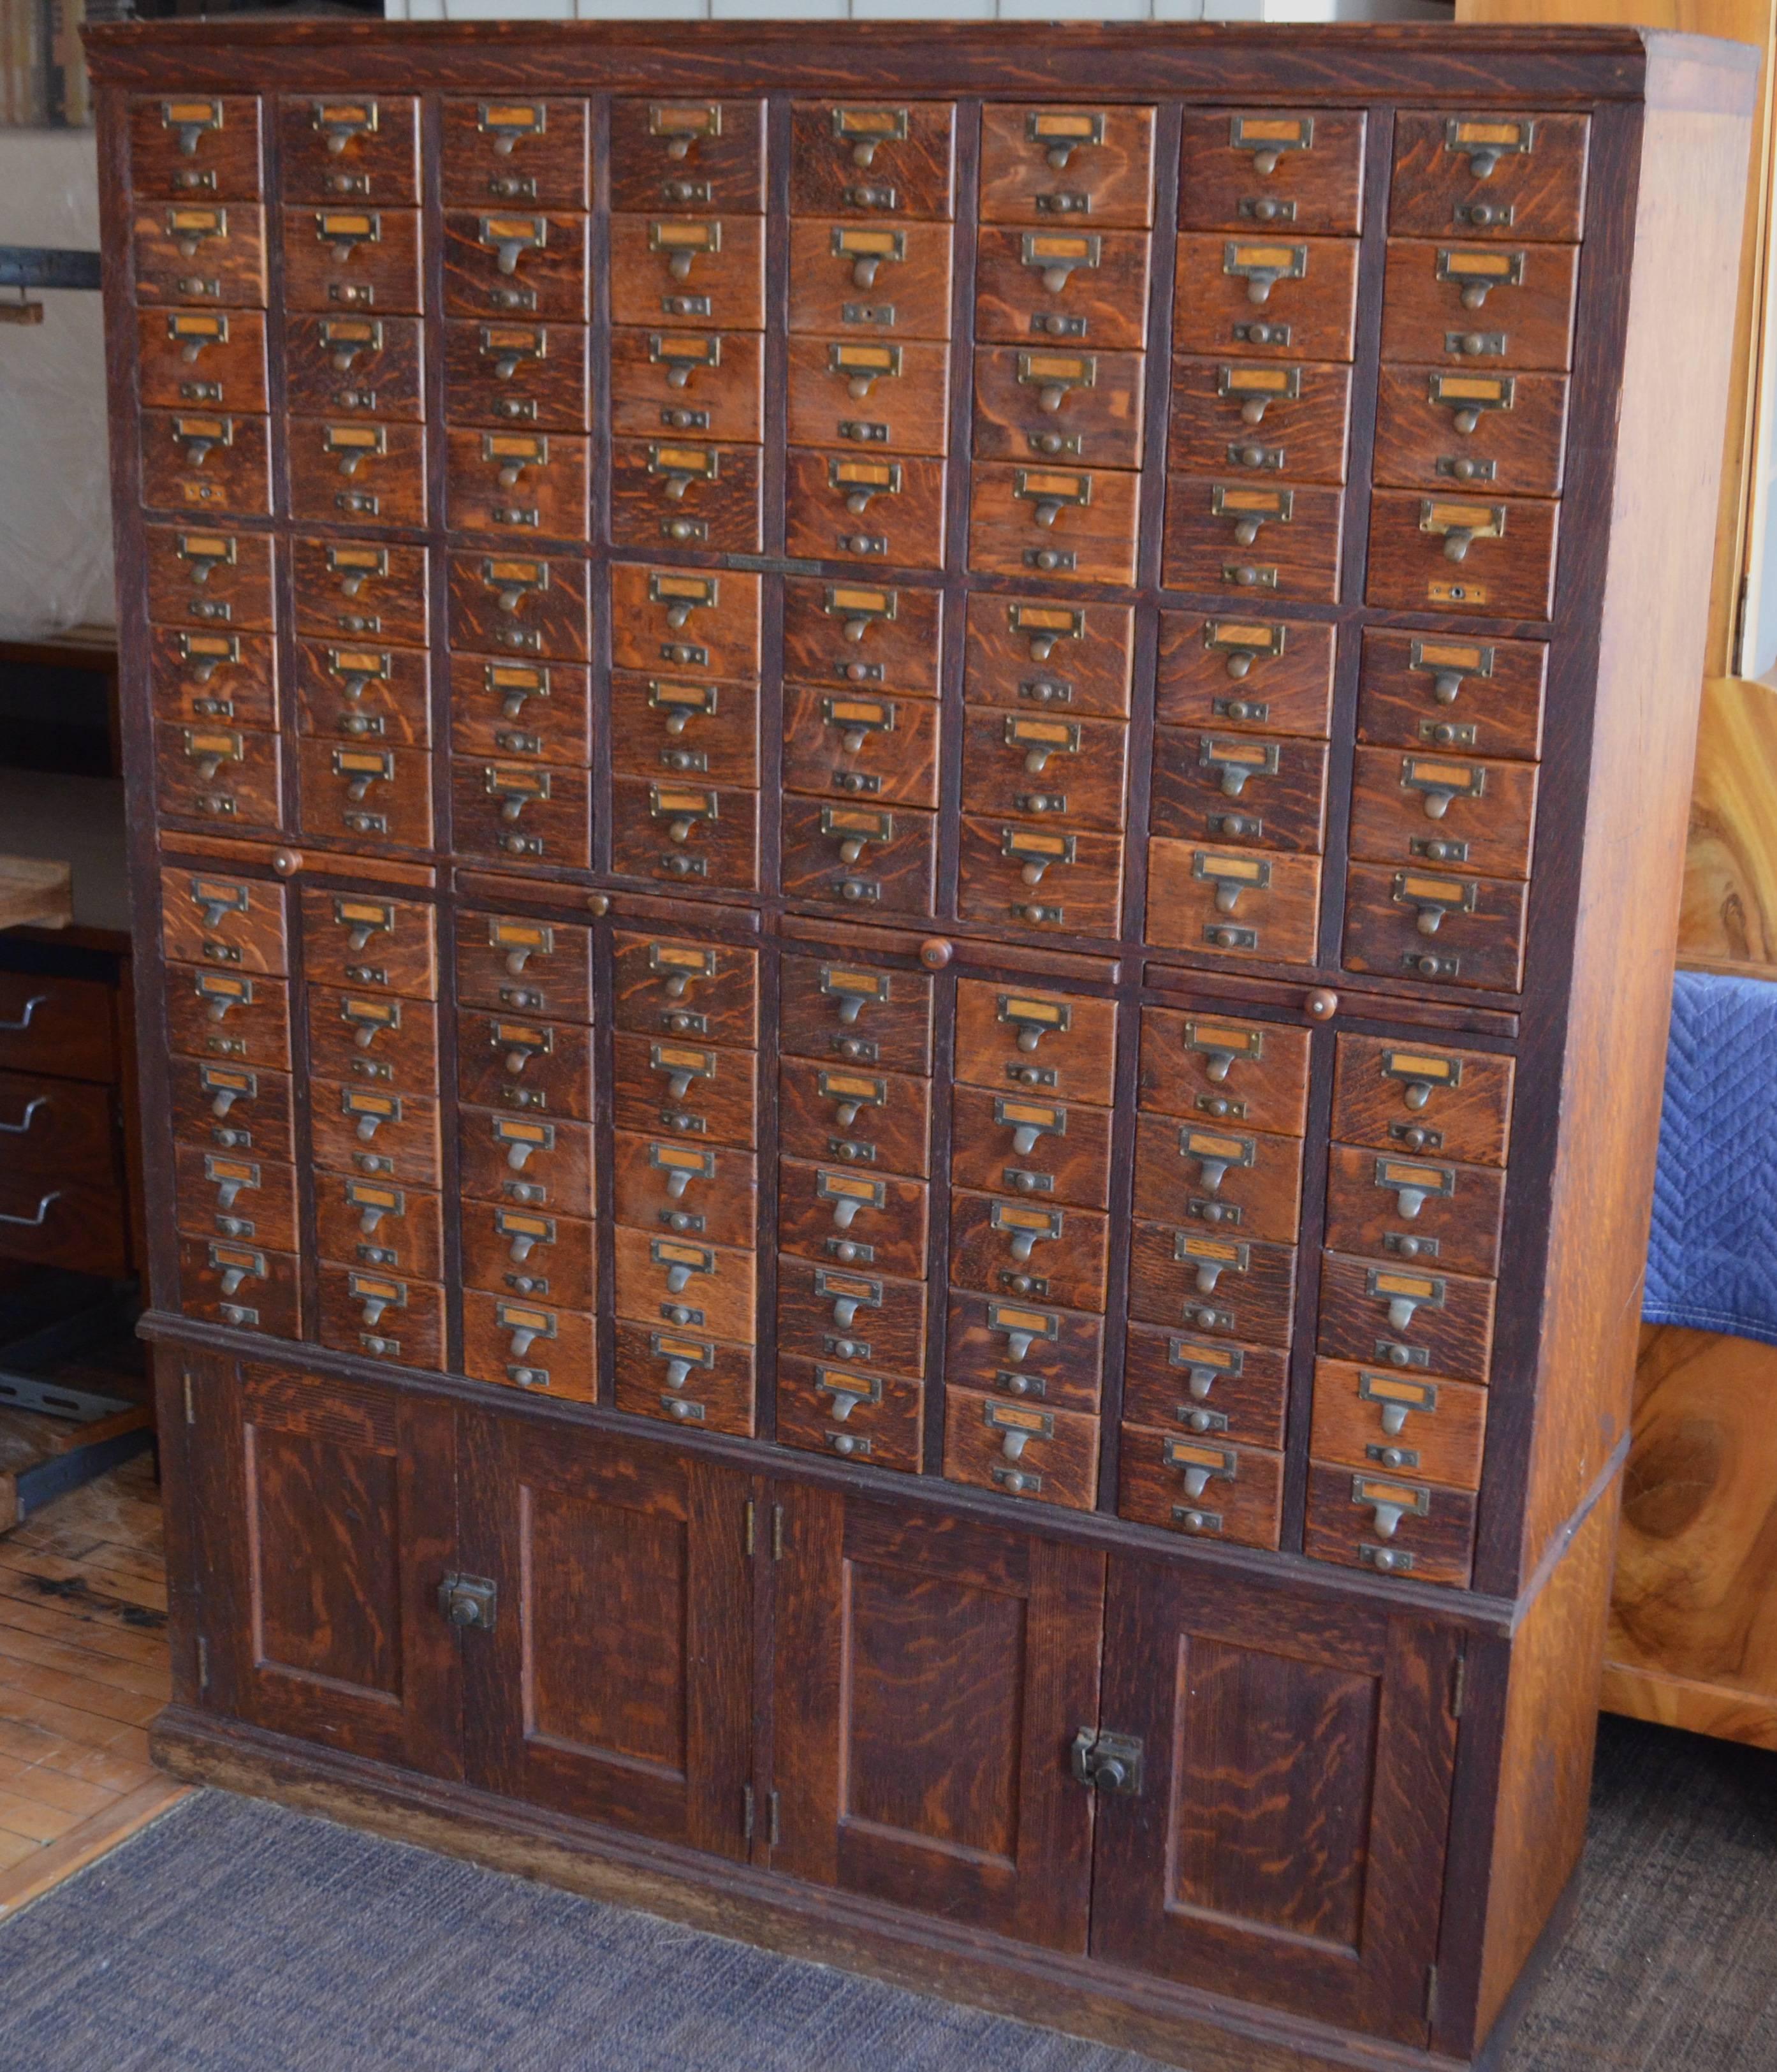 Card catalog, file cabinet, solid oak from Chicago library, early 20th century. 96 drawers with brass pulls and two lower compartments. Totally restored maintaining wonderful varnished patina of drawer fronts. An iconic piece. Internal dimensions of